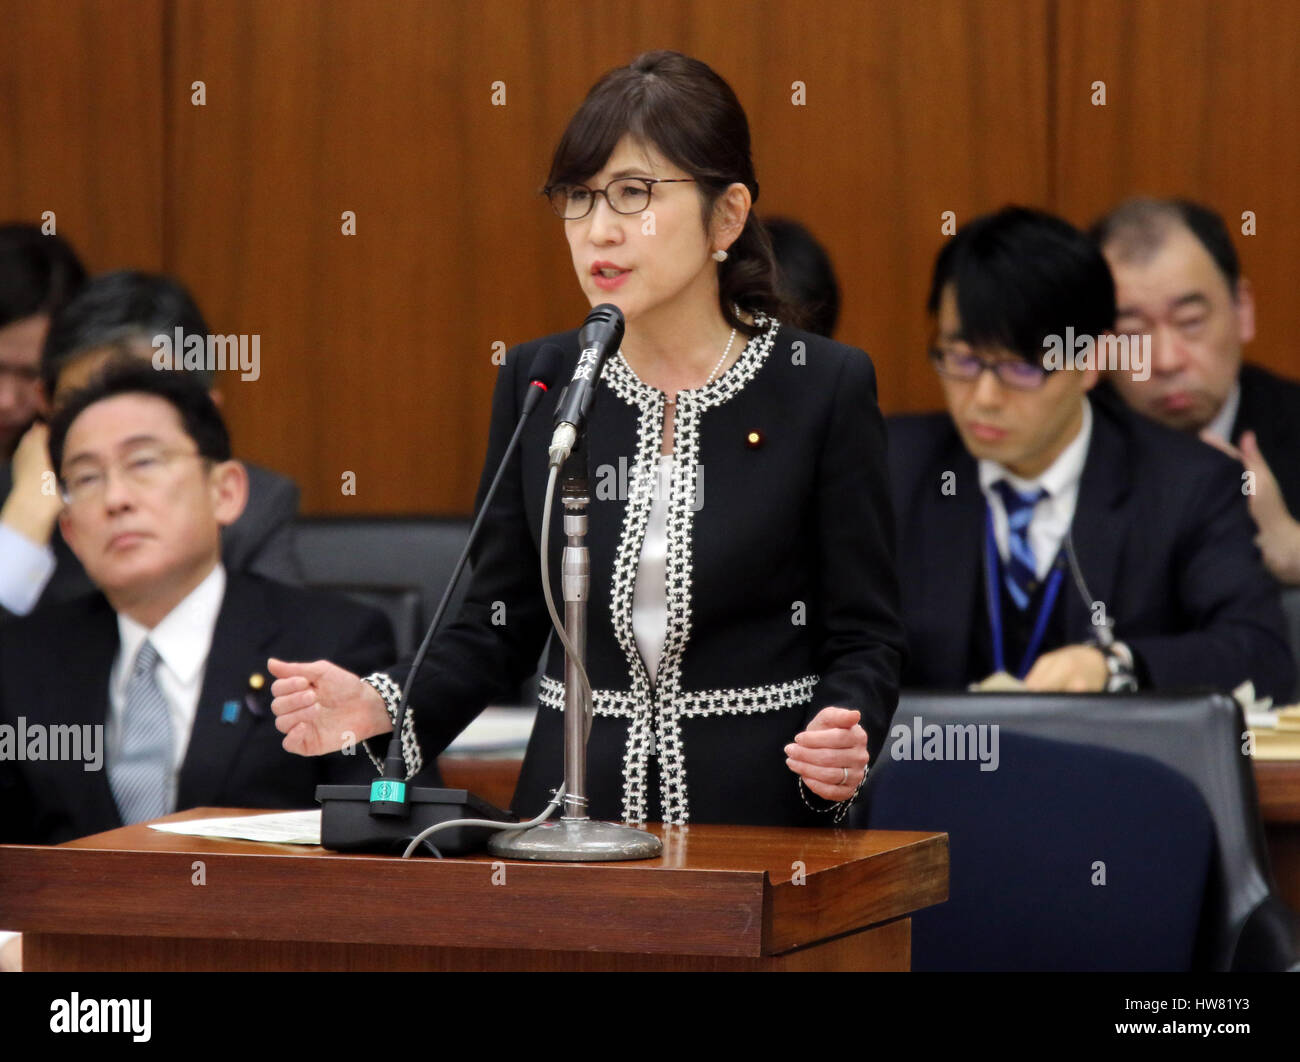 Tokyo, Japan. 17th Mar, 2017. Japanese Defense Minister Tomomi Inada answers a question by an opposition lawmaker at the Lower House's foreign affairs committee session at the National Diet in Tokyo on Friday, March 17, 2017. Inada ordered the inspector to investigate fresh allegations over the ministrys institutional coverup of daily activity logs of the Ground Self-Defense Forces in South Sudan. Credit: Yoshio Tsunoda/AFLO/Alamy Live News Stock Photo